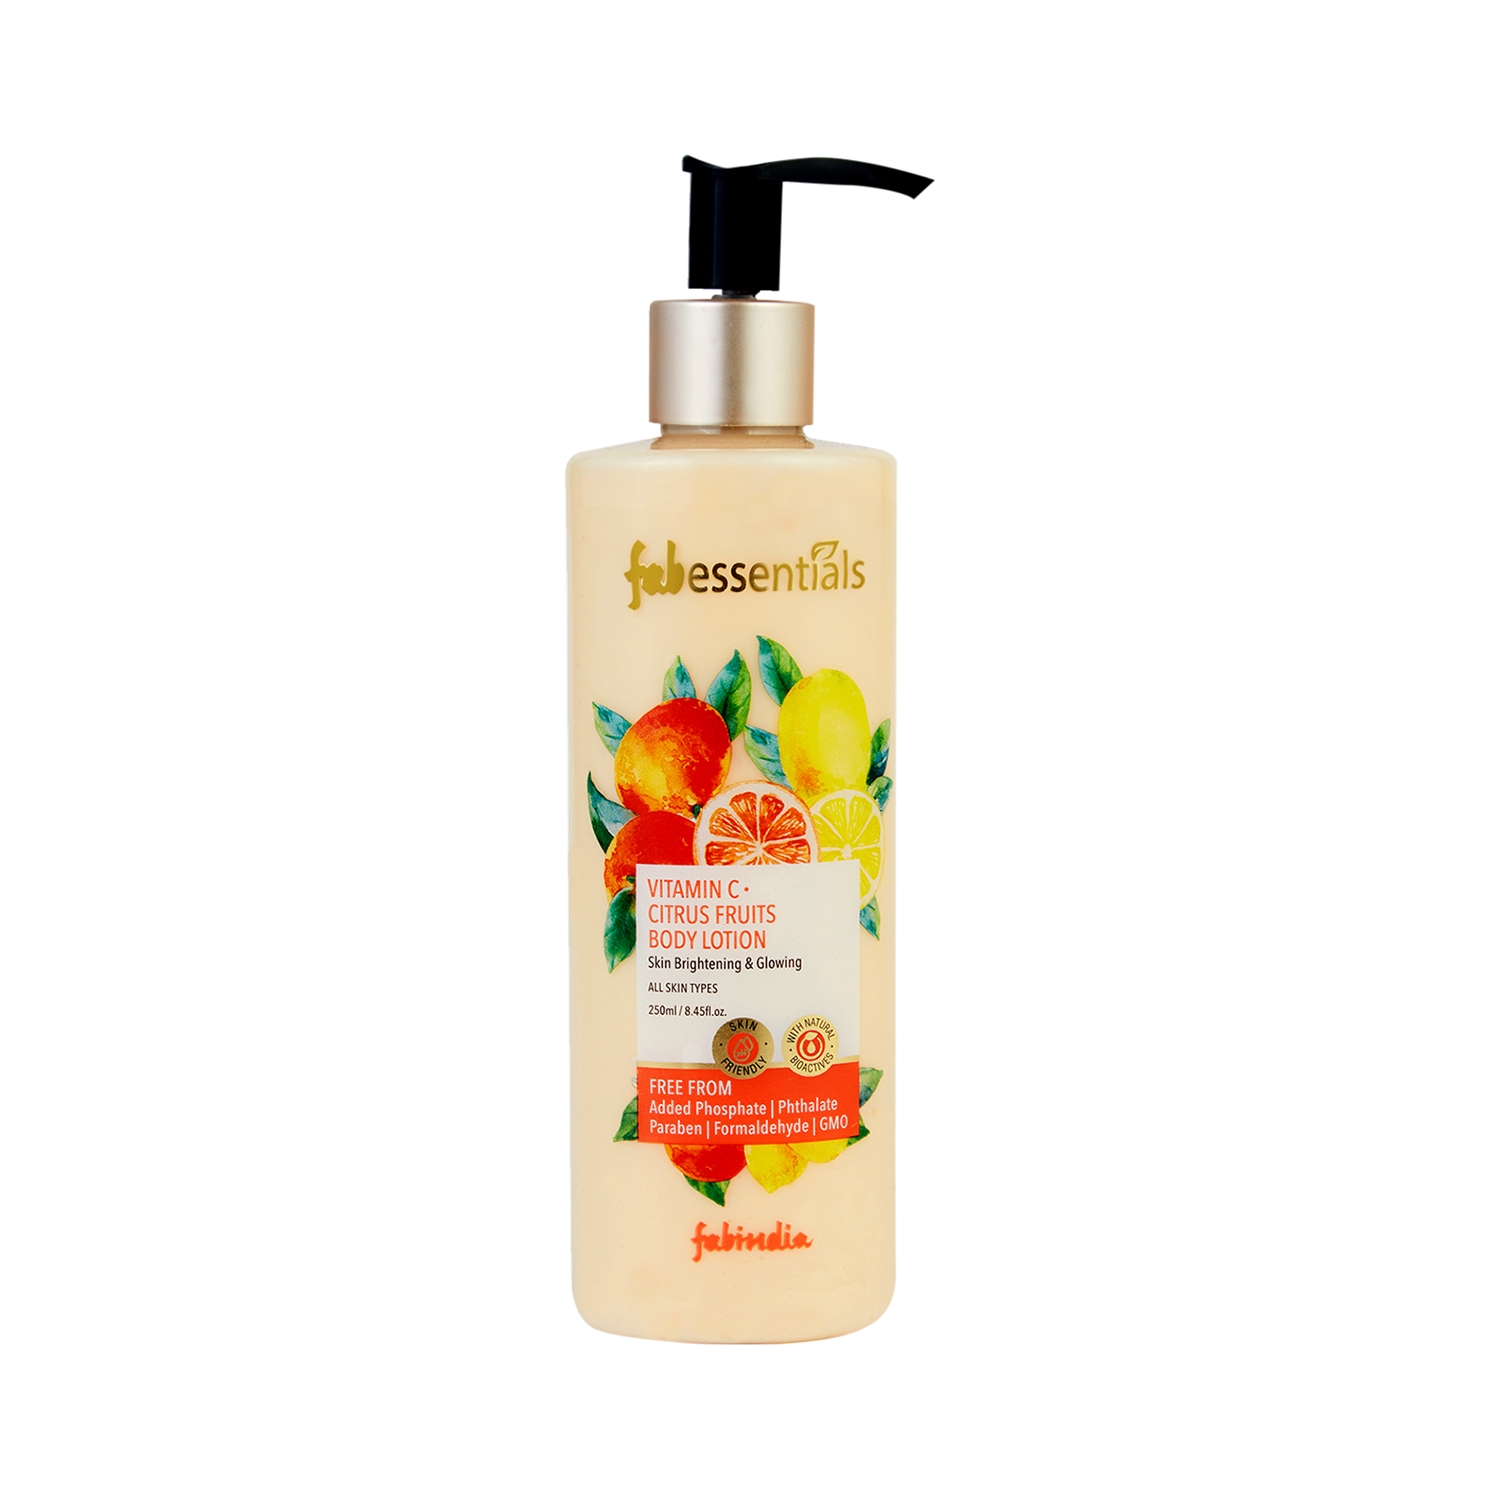 Fabessentials by Fabindia | Fabessentials by Fabindia Vitamin C Citrus Fruits Body Lotion (250ml)